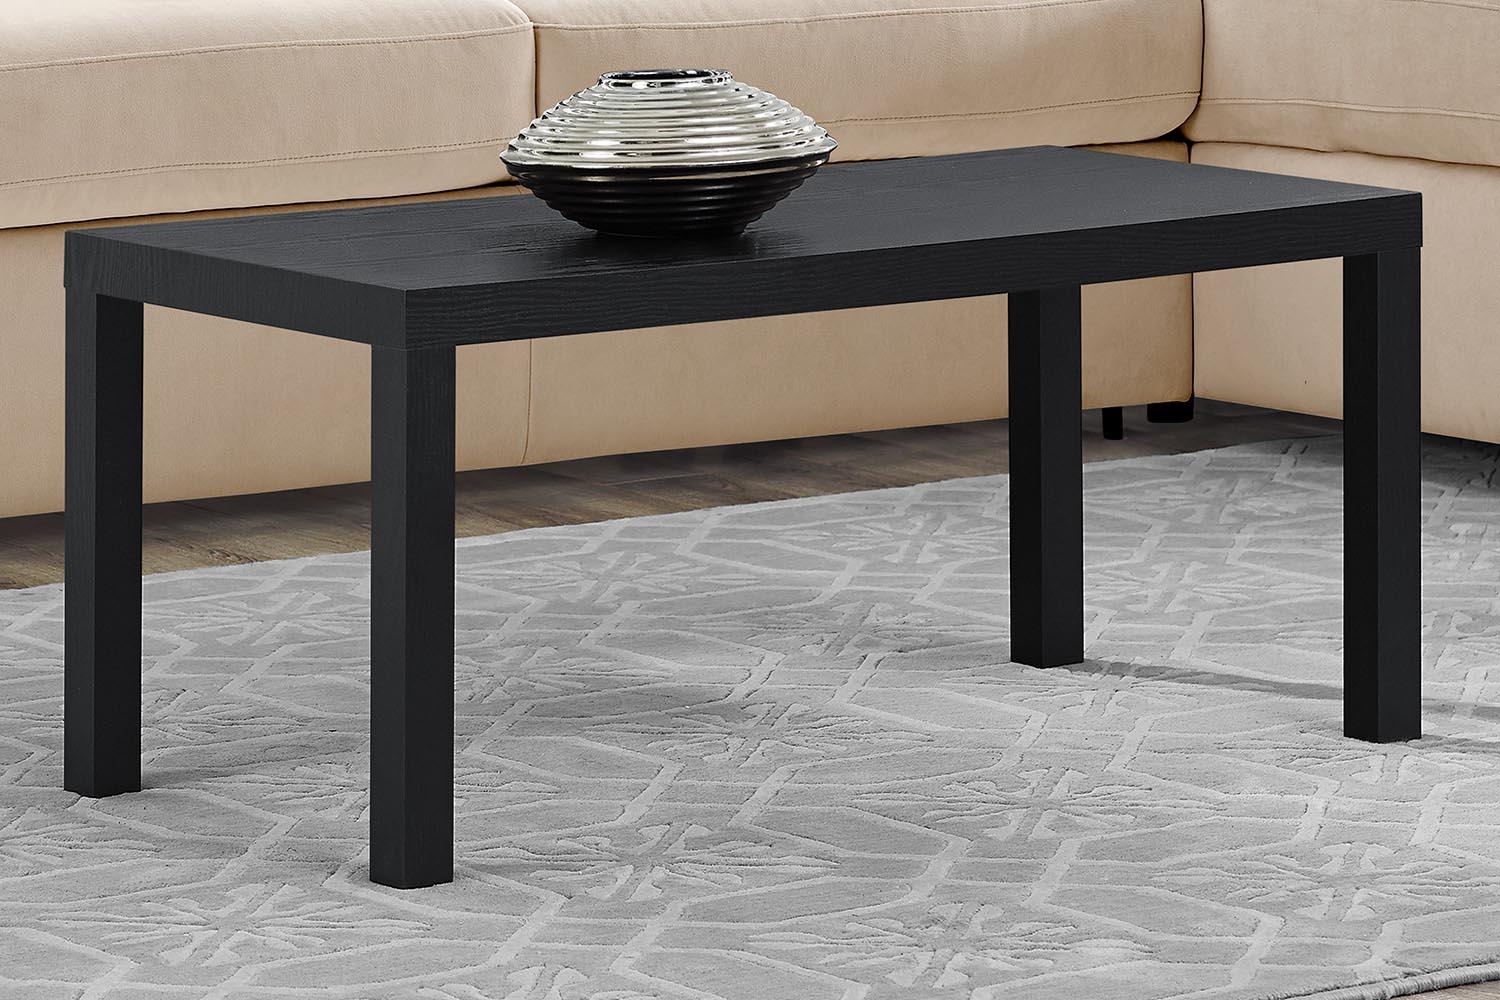 Mainstays Parsons Coffee Table, Black - image 1 of 6